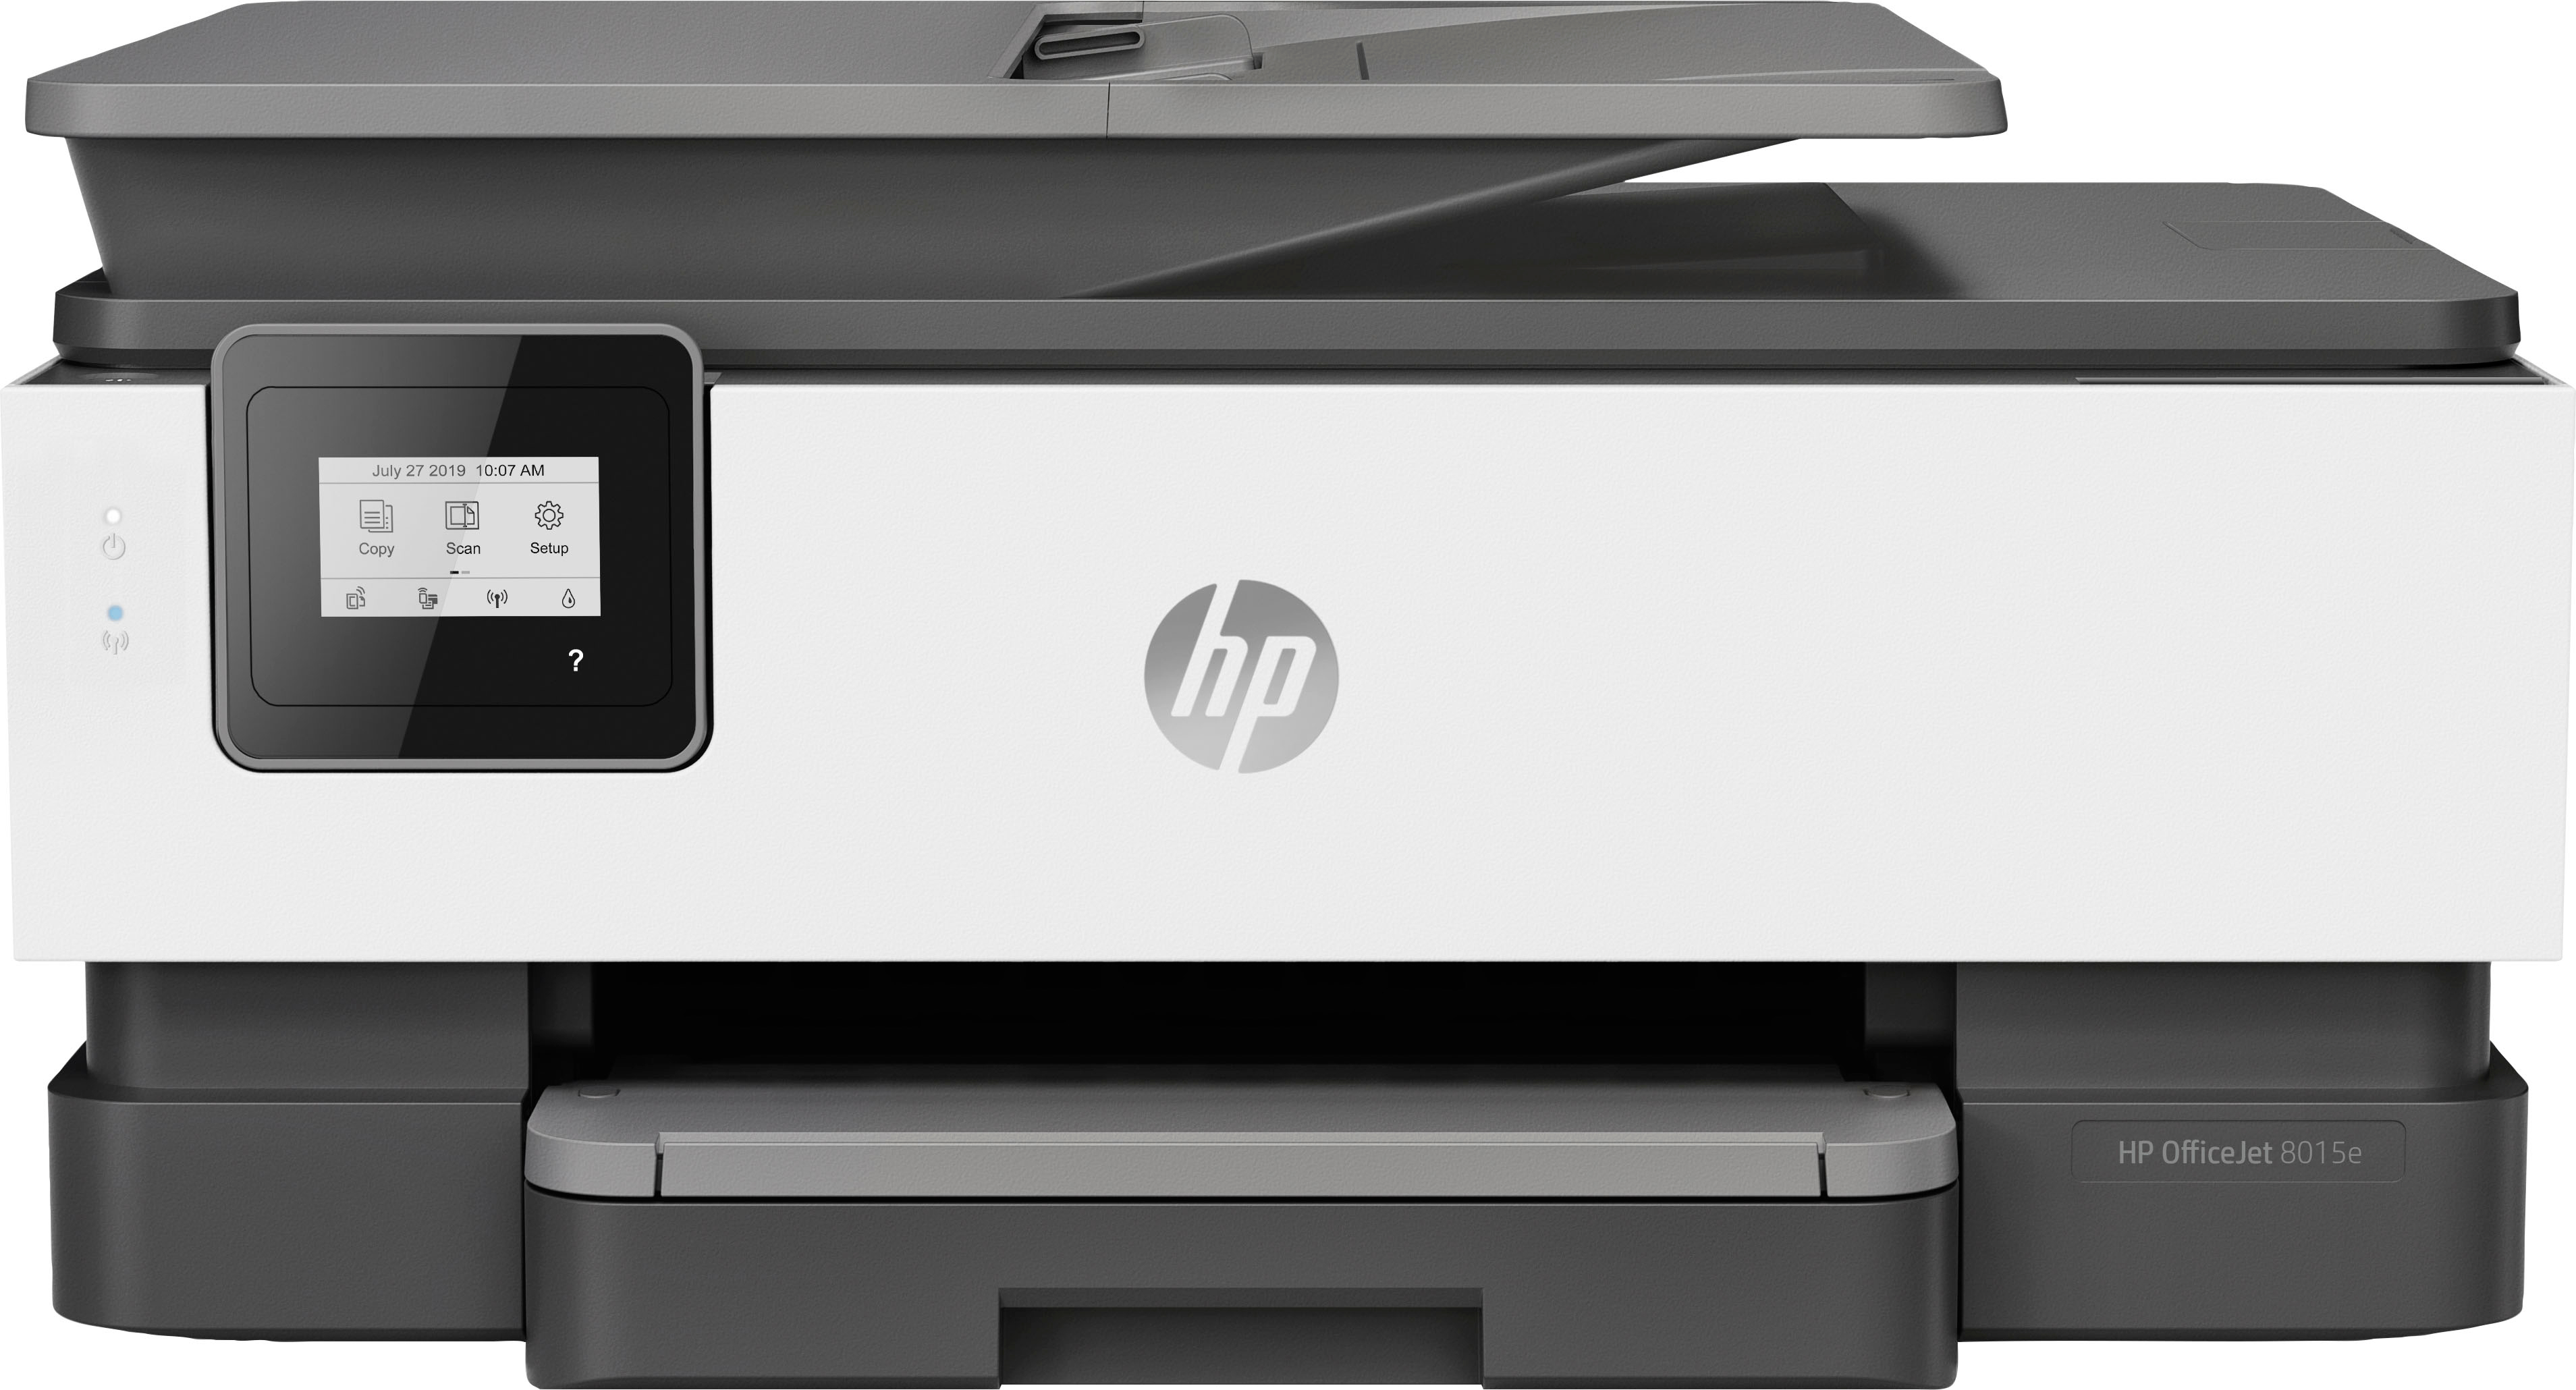 Photo 1 of OfficeJet 8015e Wireless All-In-One Inkjet Printer with 6 months of Instant Ink Included with HP+